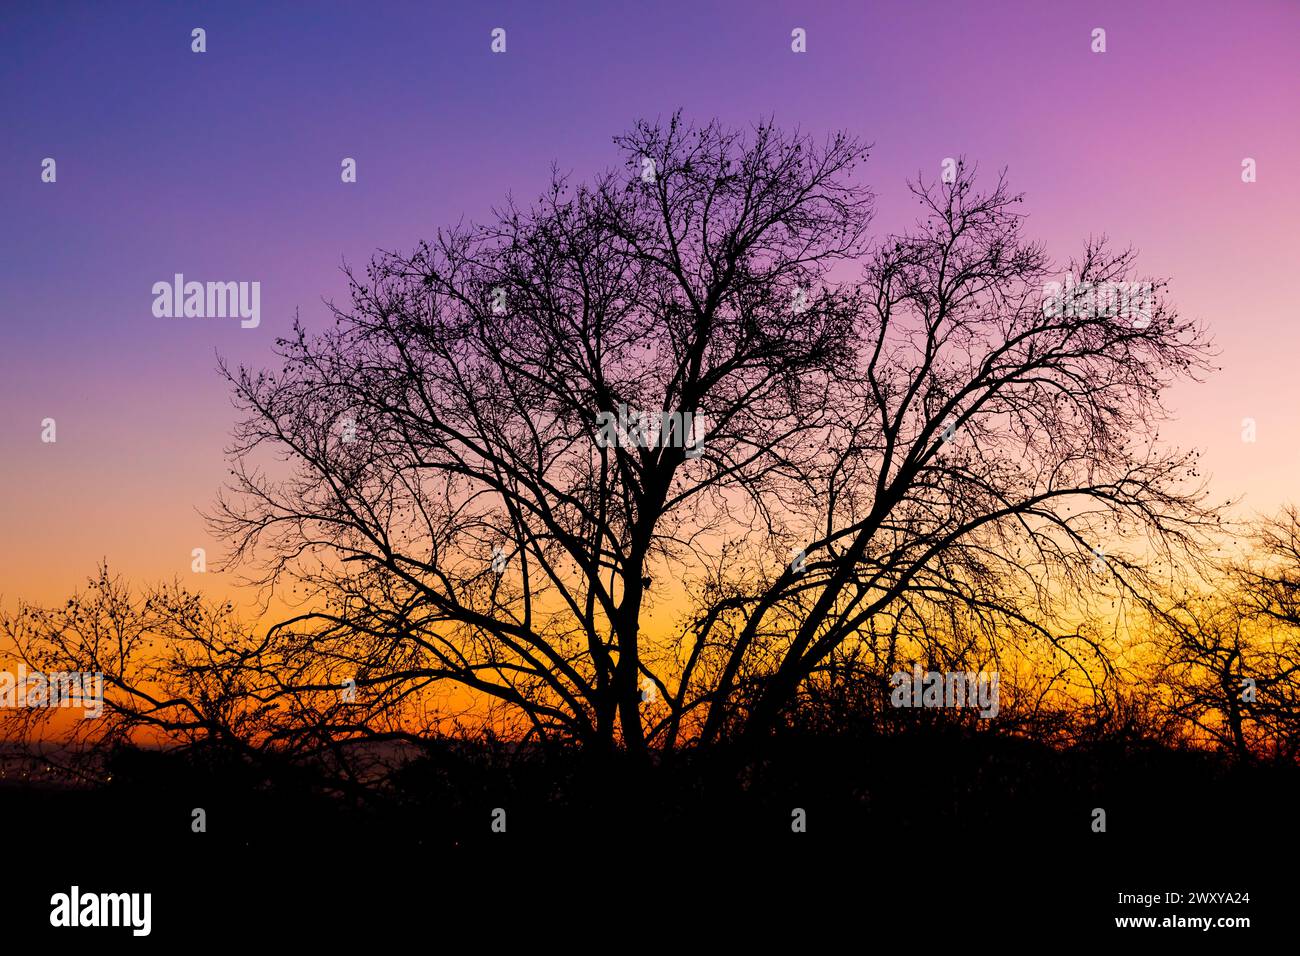 Silhouette of a tree against a pink and purple dusk sunset sky in Cape Town Stock Photo